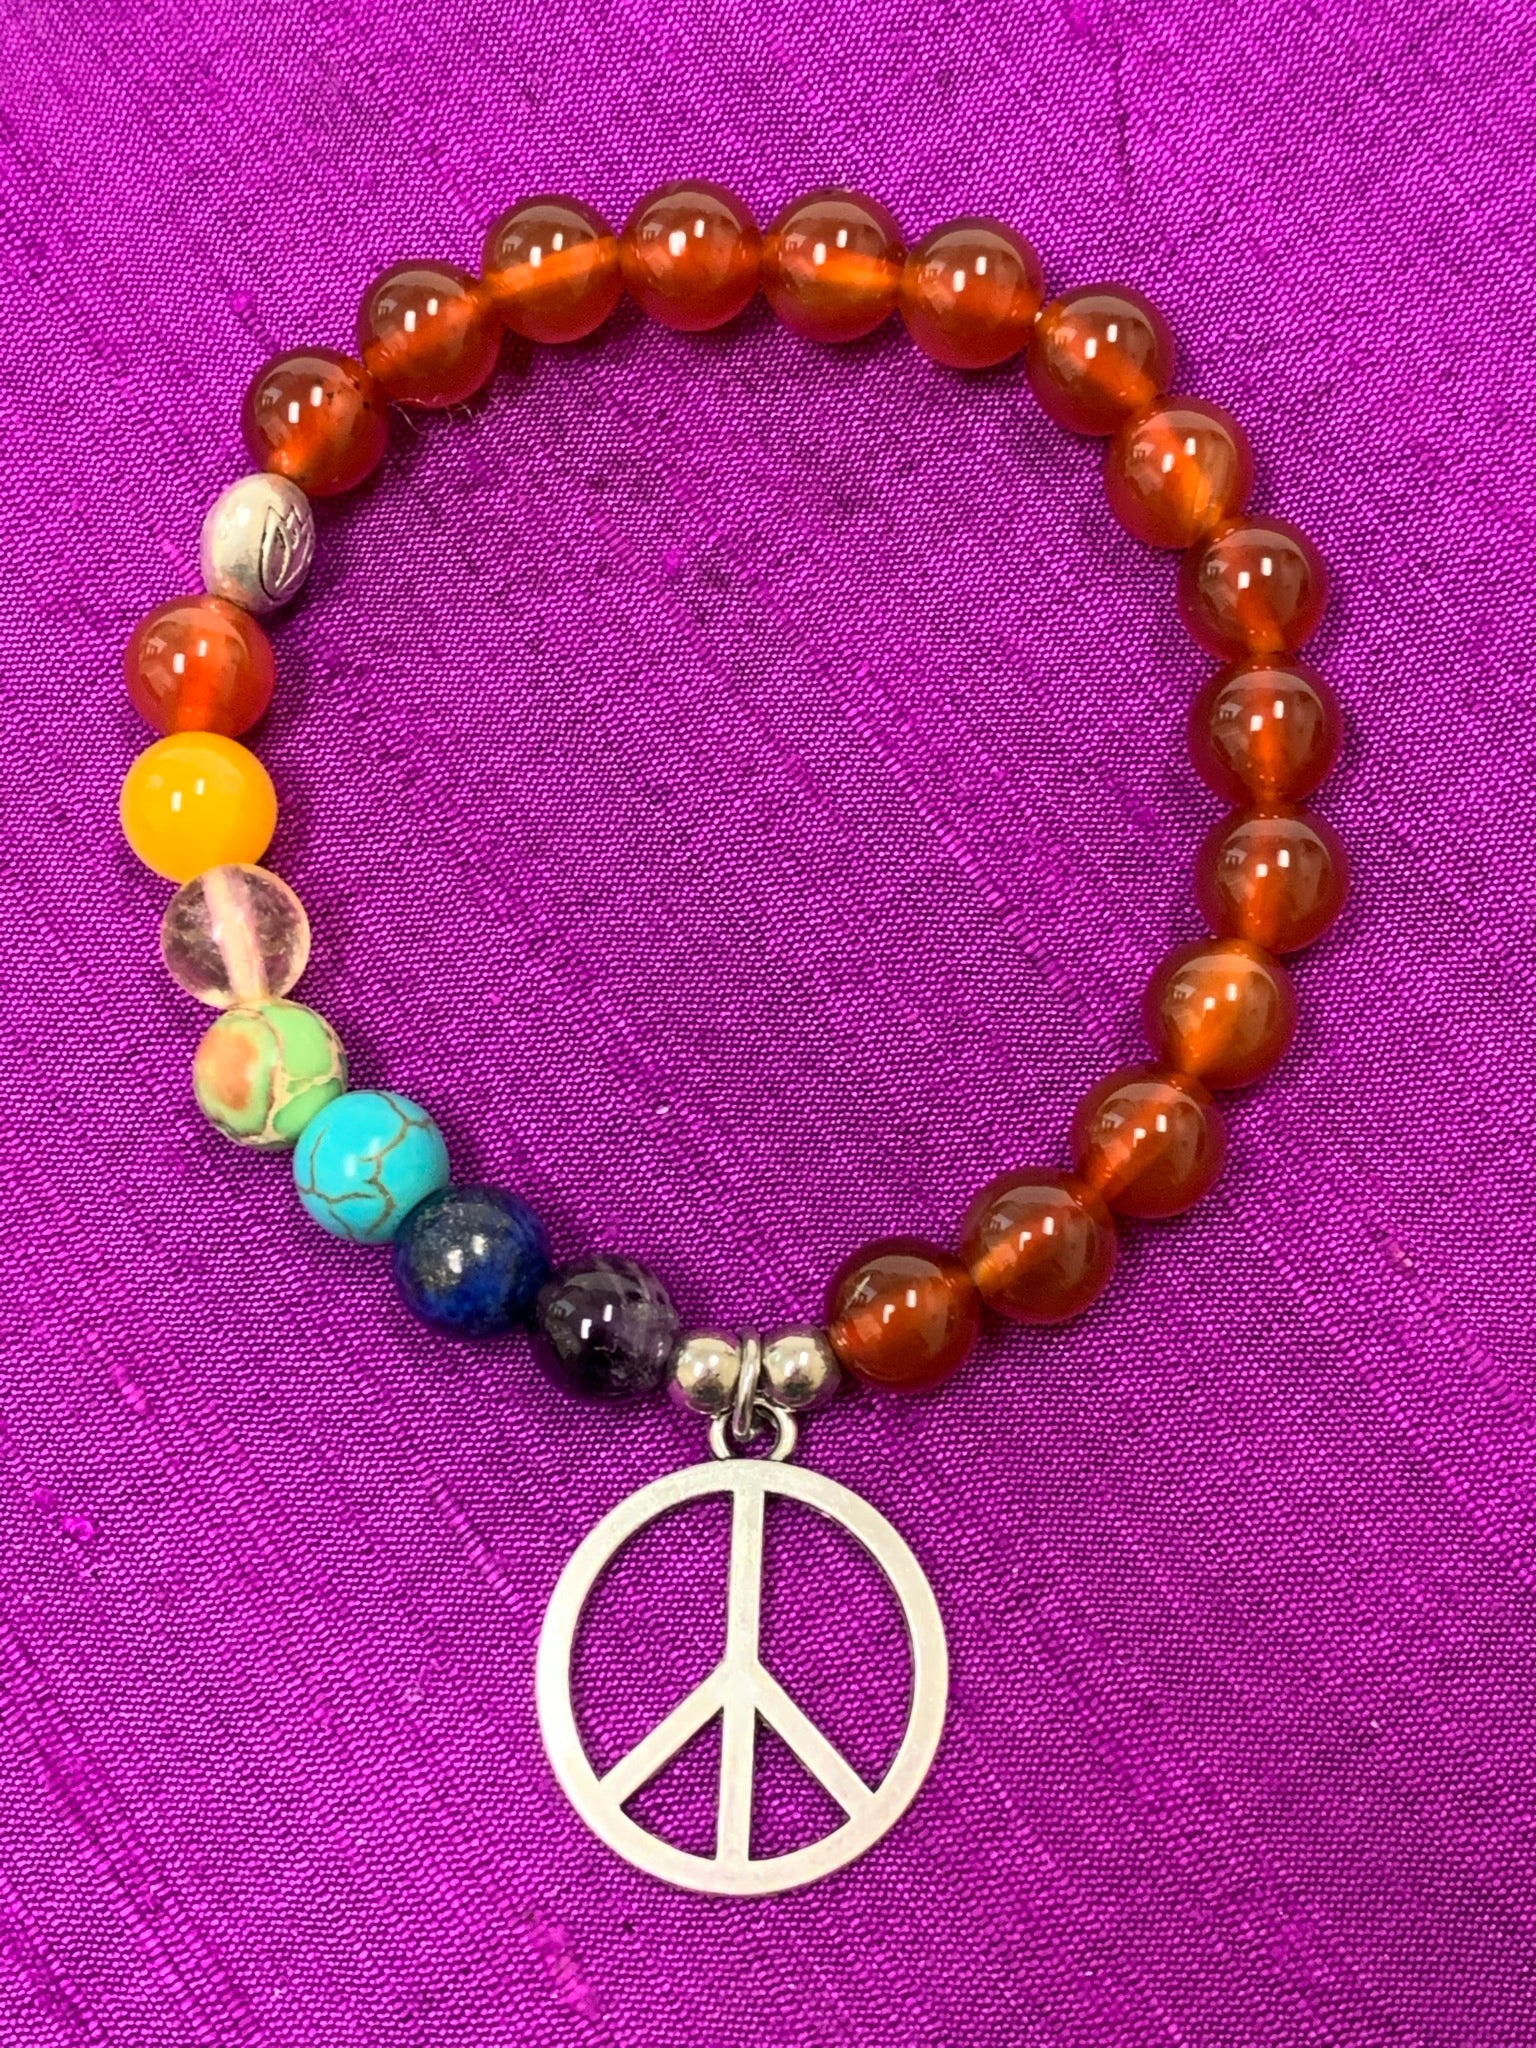 Second Close-up of the carnelian gemstone power bracelet, accented by 7 different gemstones, representing the 7 chakras and a silver-colored peace sign charm and 3 additional silver-colored beads (2 of which are plain and one has a lotus on it). These additional silver colored beads are not sterling silver.